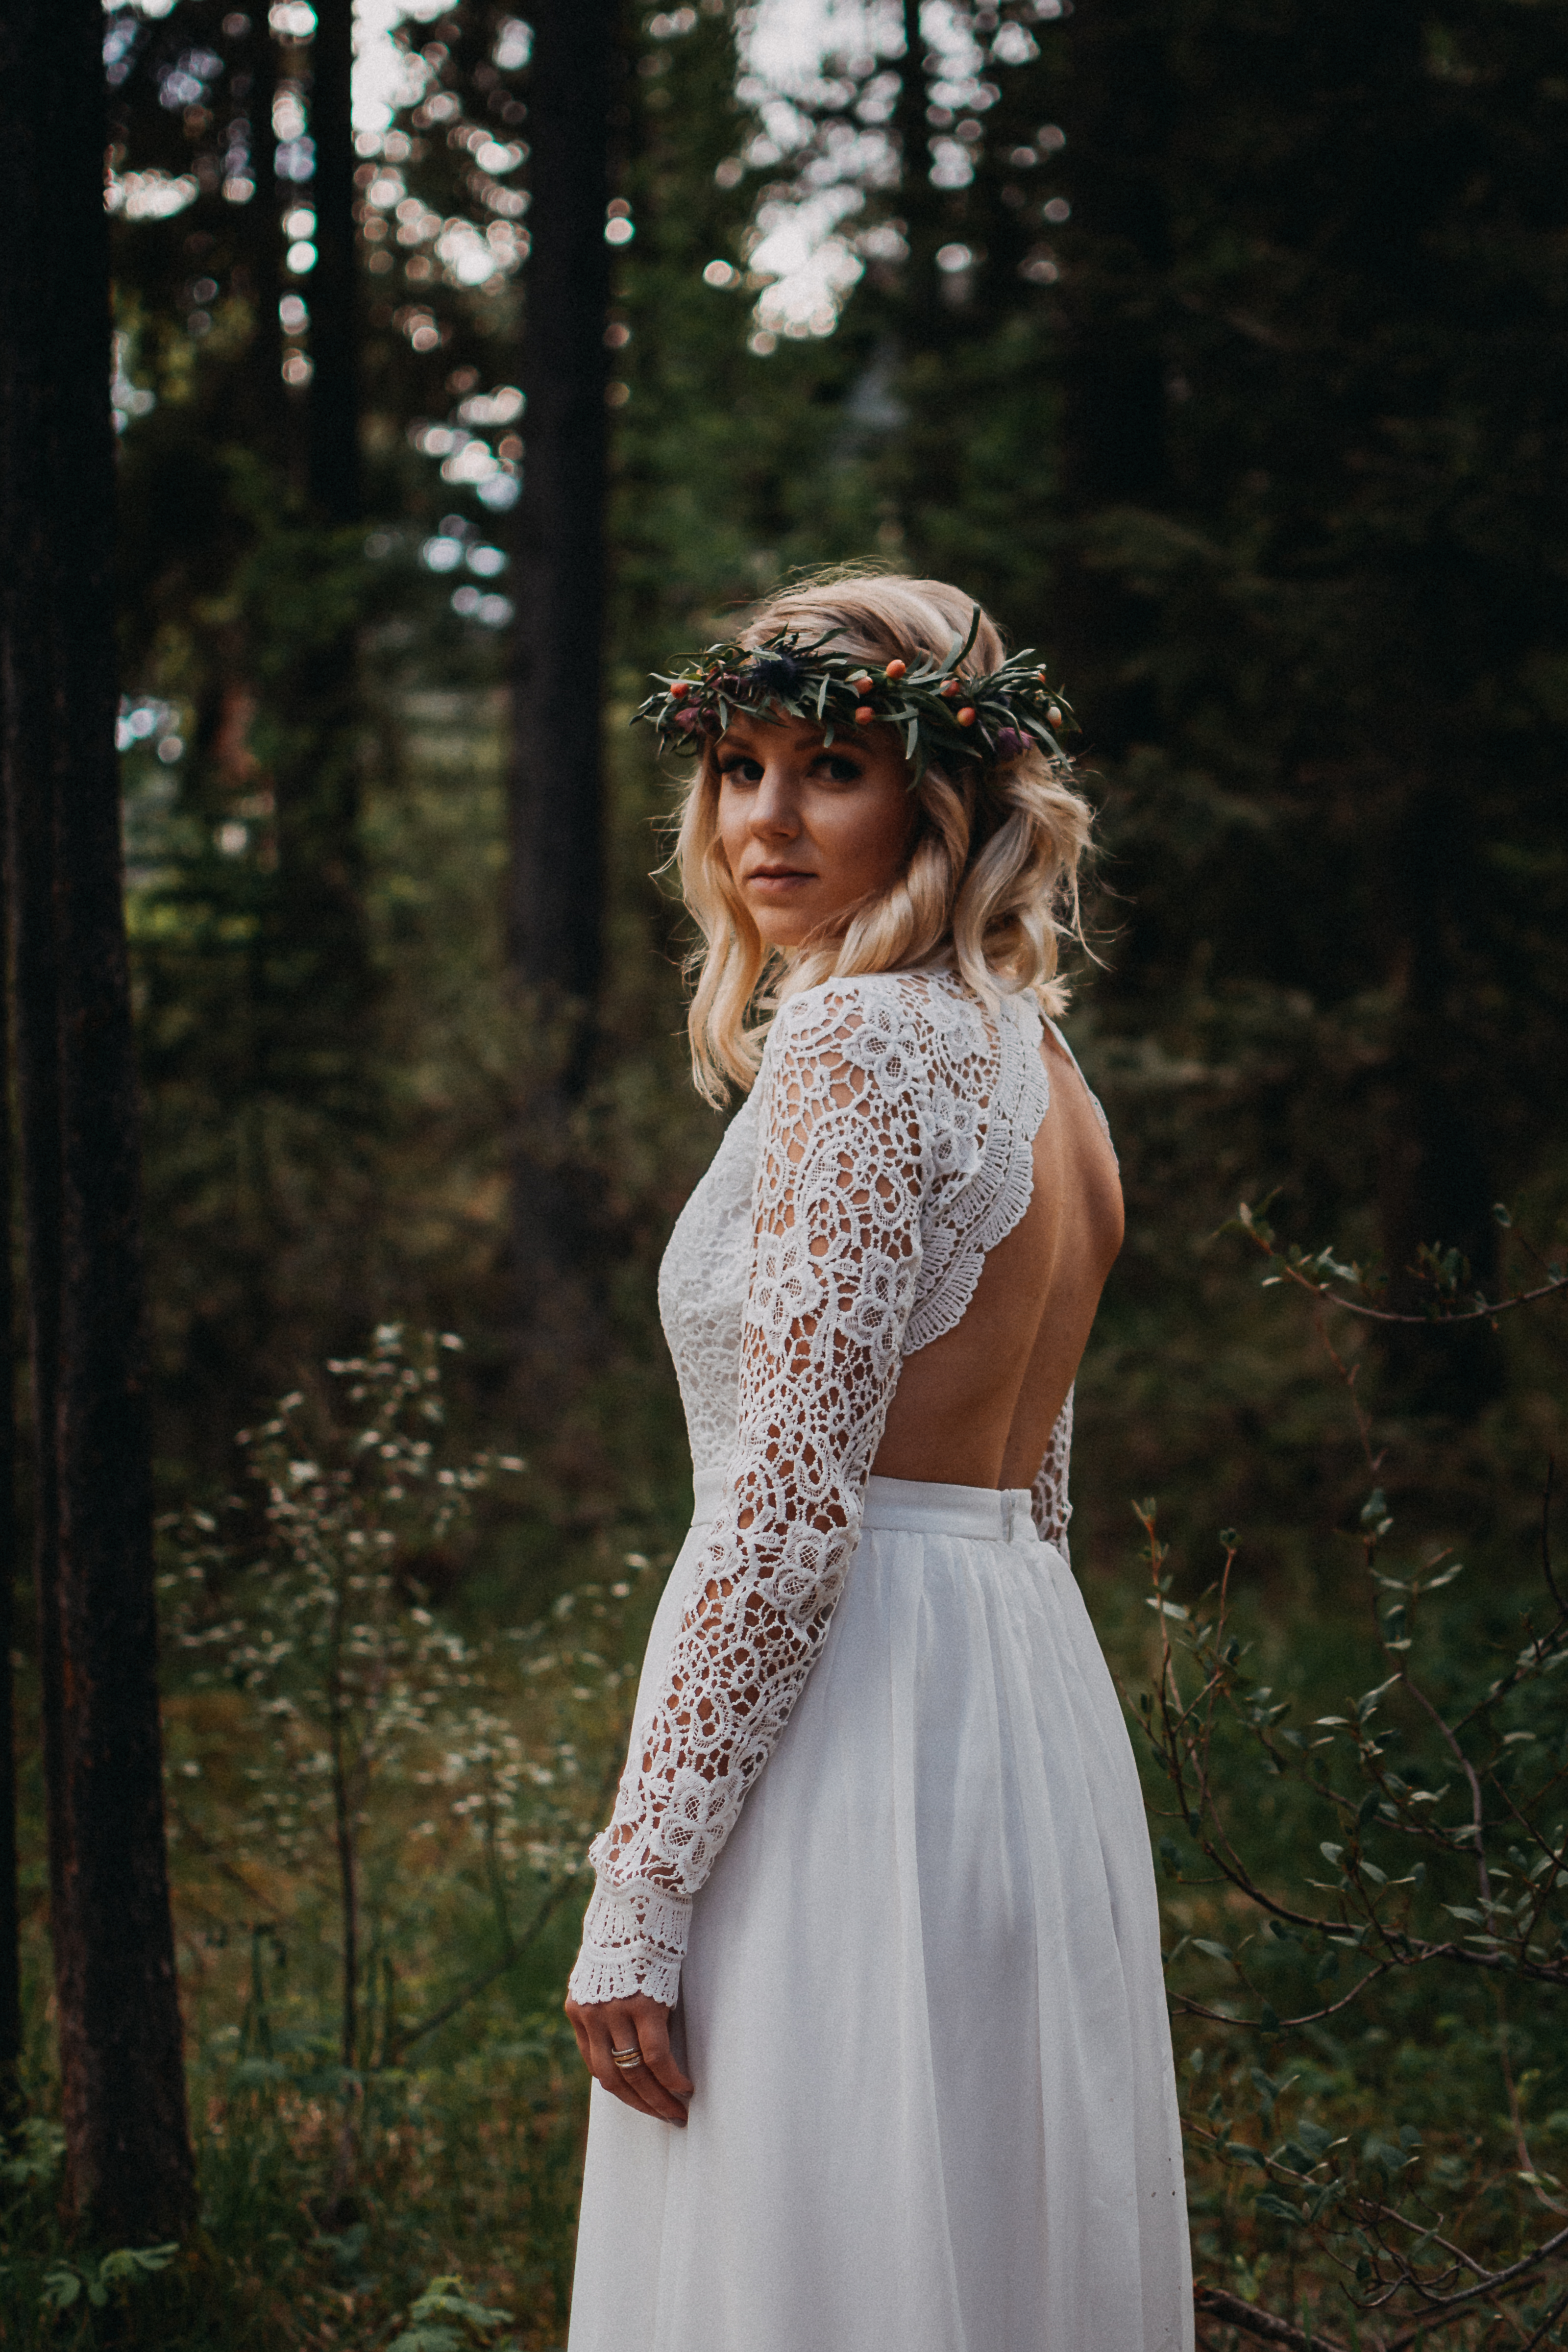 The bride posing in a forest looking at the camera, wearing a floral crown